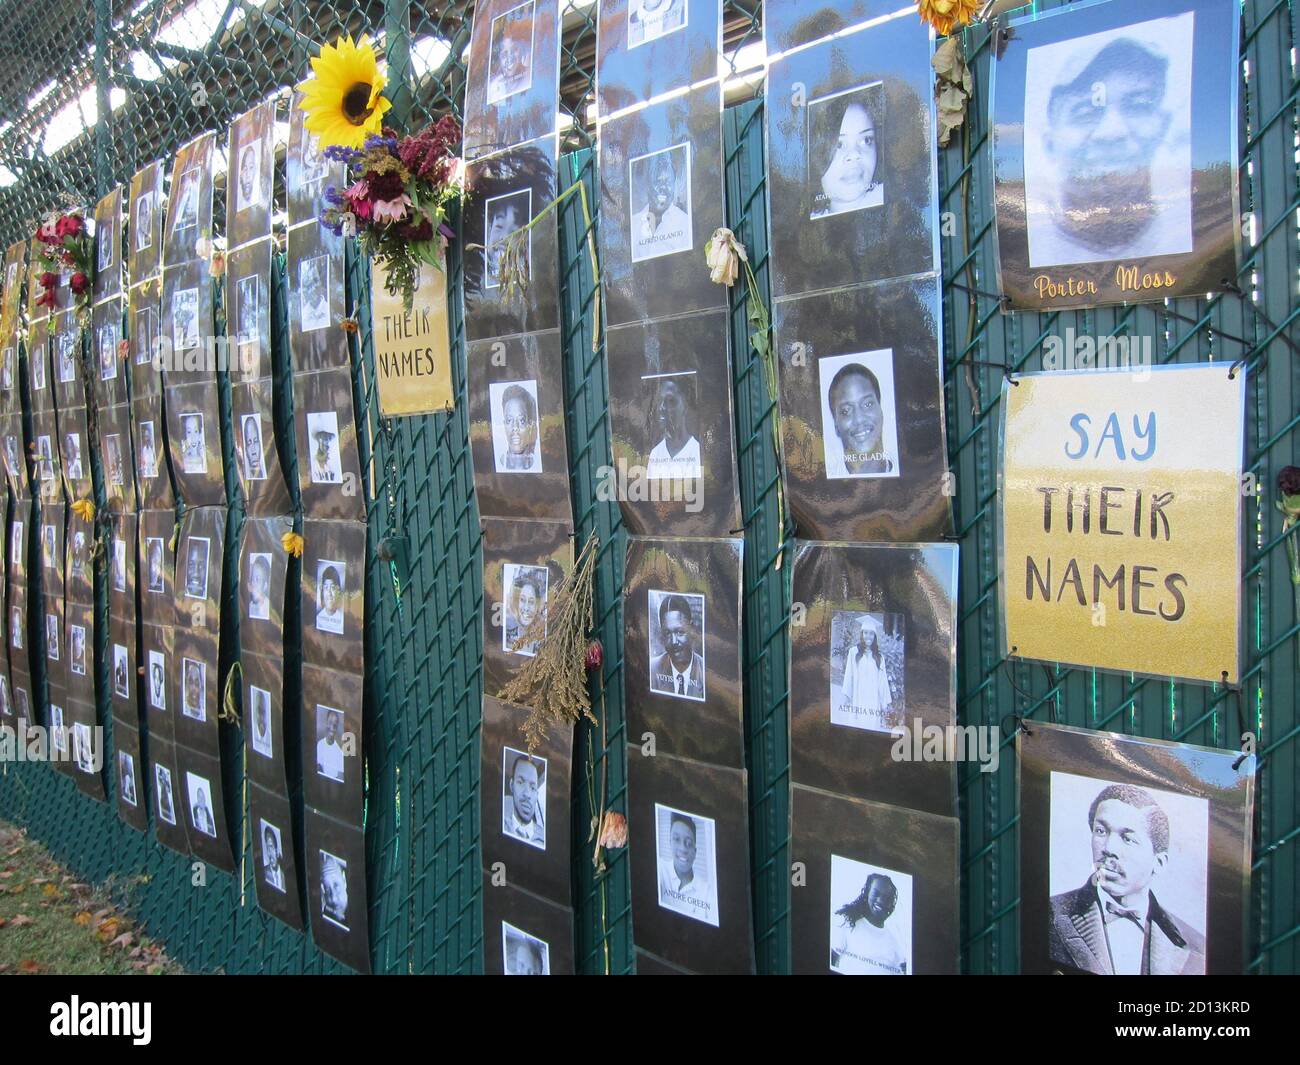 Cooperstown, NY / USA - October 1, 2020: 'Say Their Names' Black Lives Matter memorial photo display of black victims of white violence in upstate NY Stock Photo